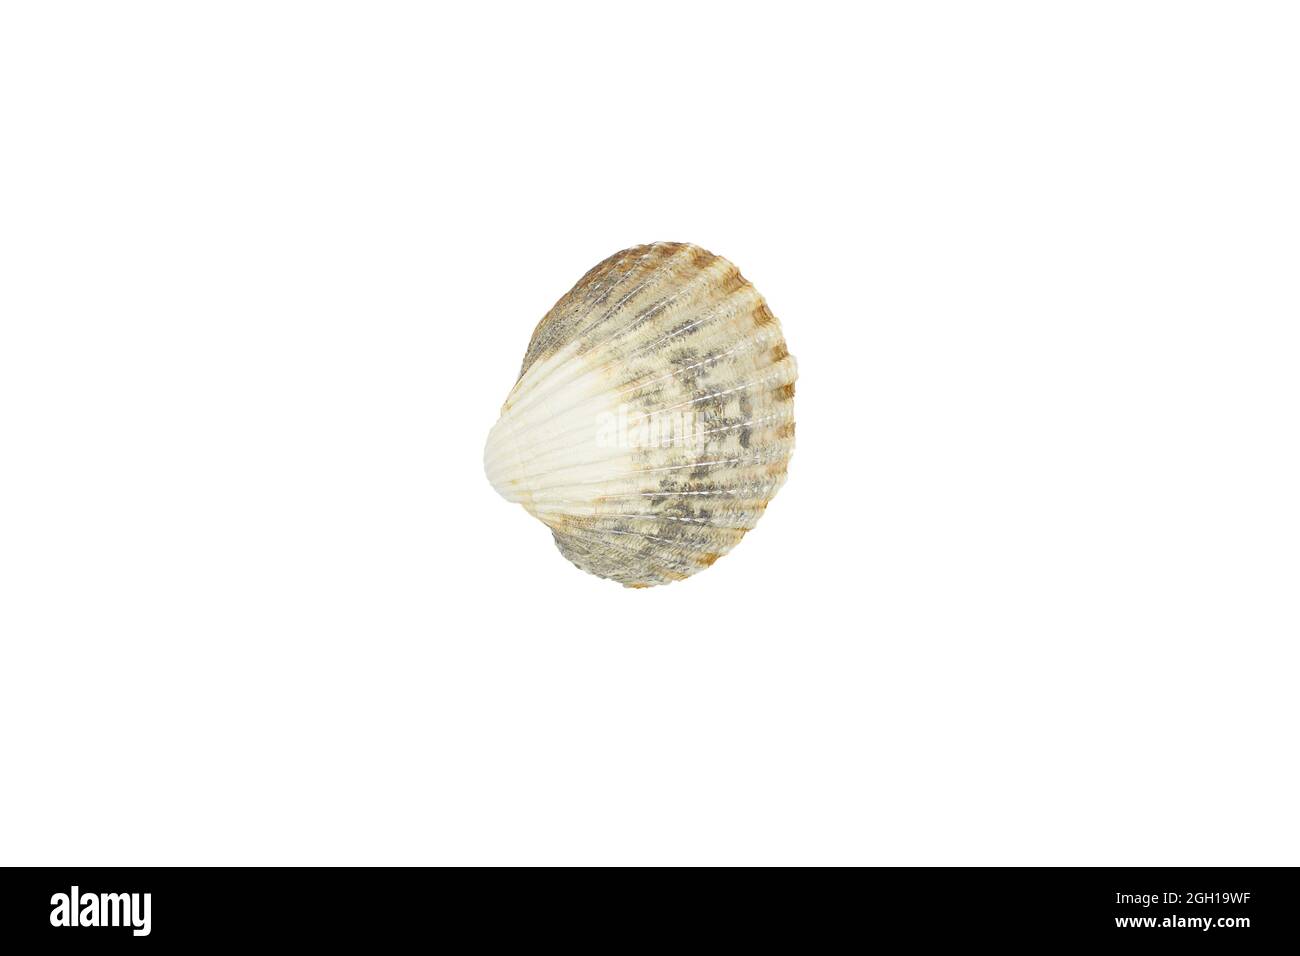 Sea shells isolated on white background. Shell, Seashell or Conch isolated on white Background as Decor or Souvenir. Stock Photo